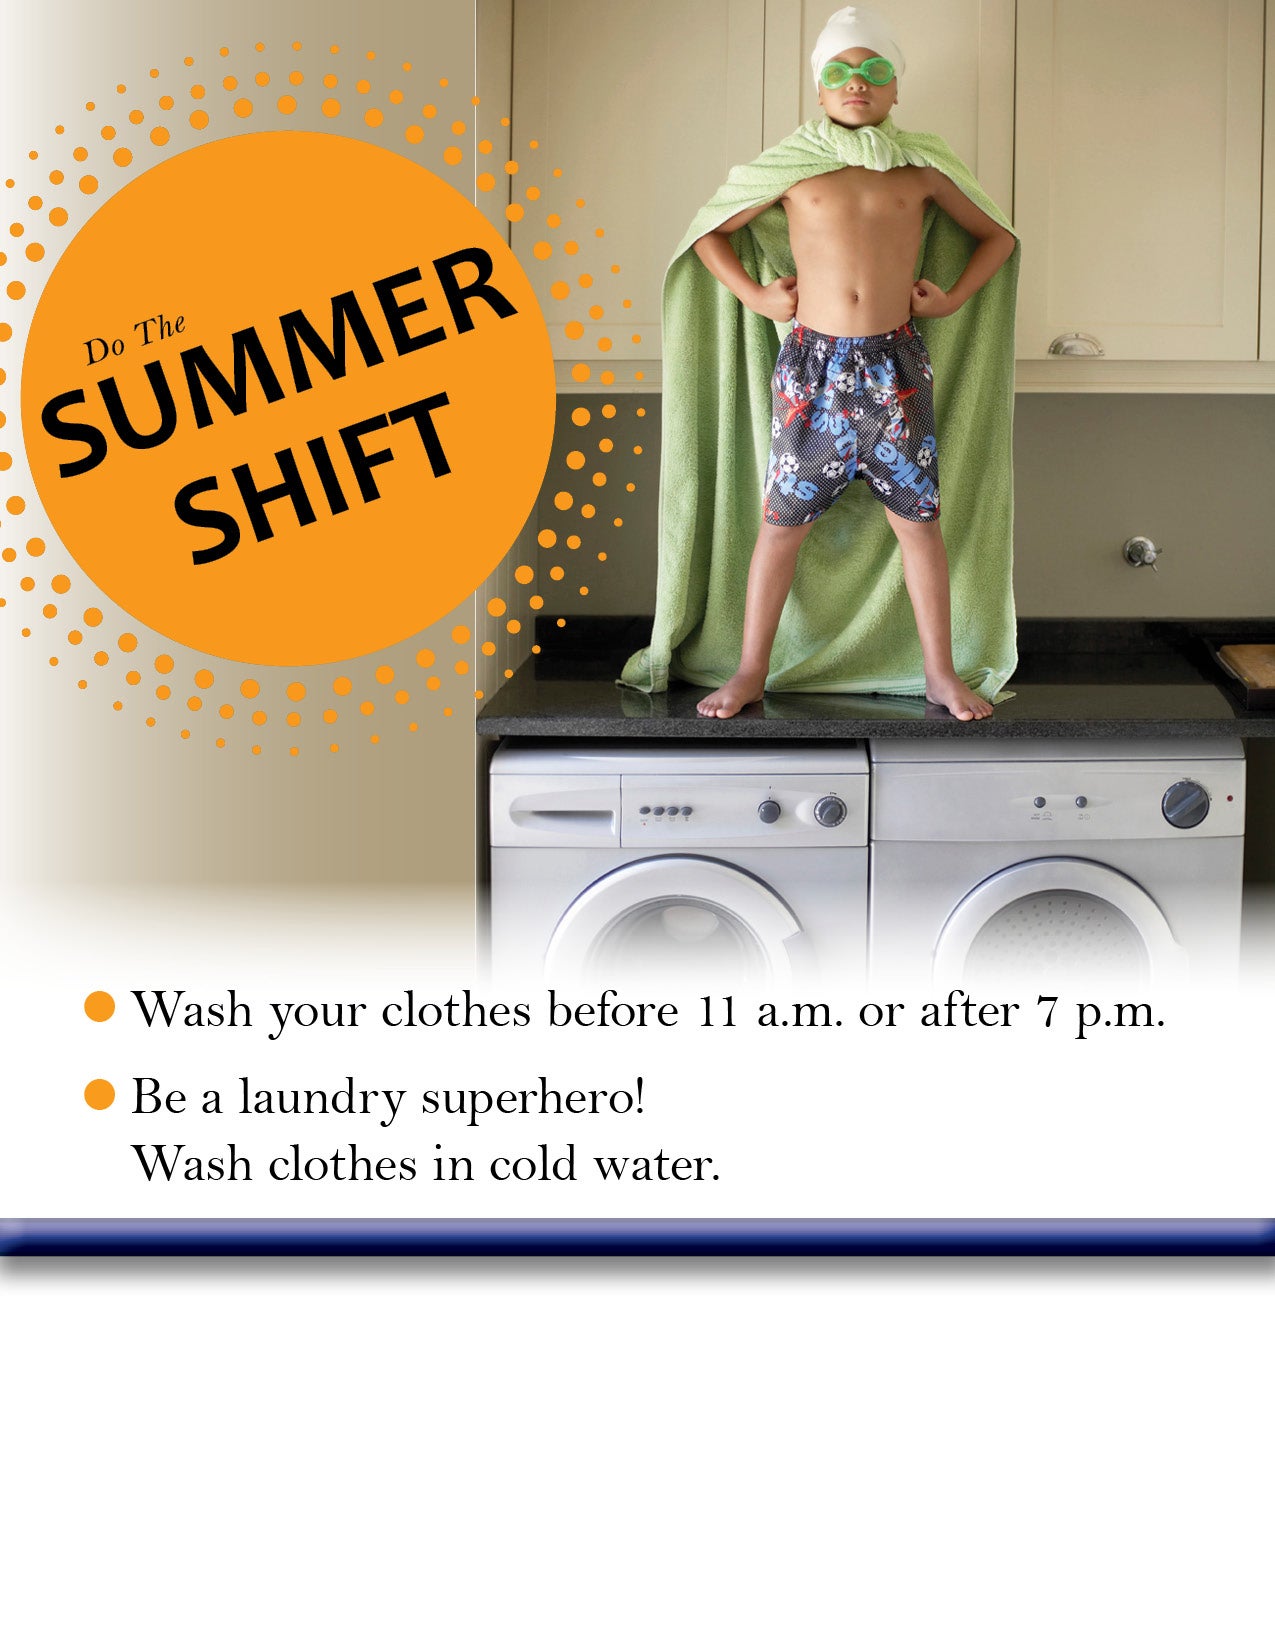 Do the Summer Shift, Wash Laundry Before or After Peak Times